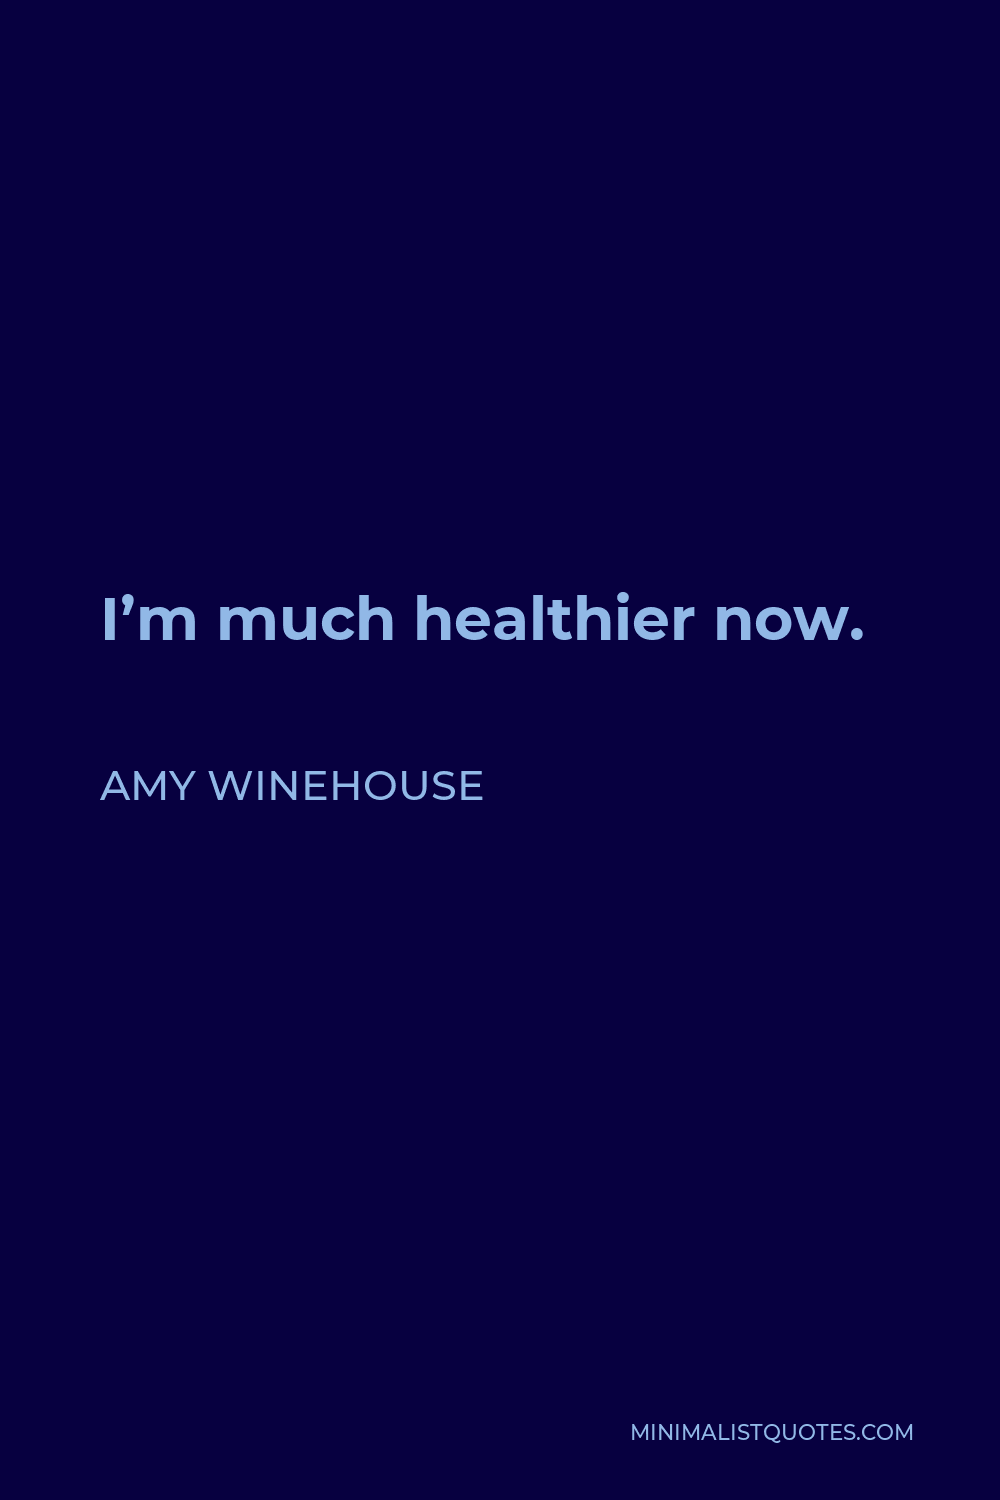 Amy Winehouse Quote - I’m much healthier now.